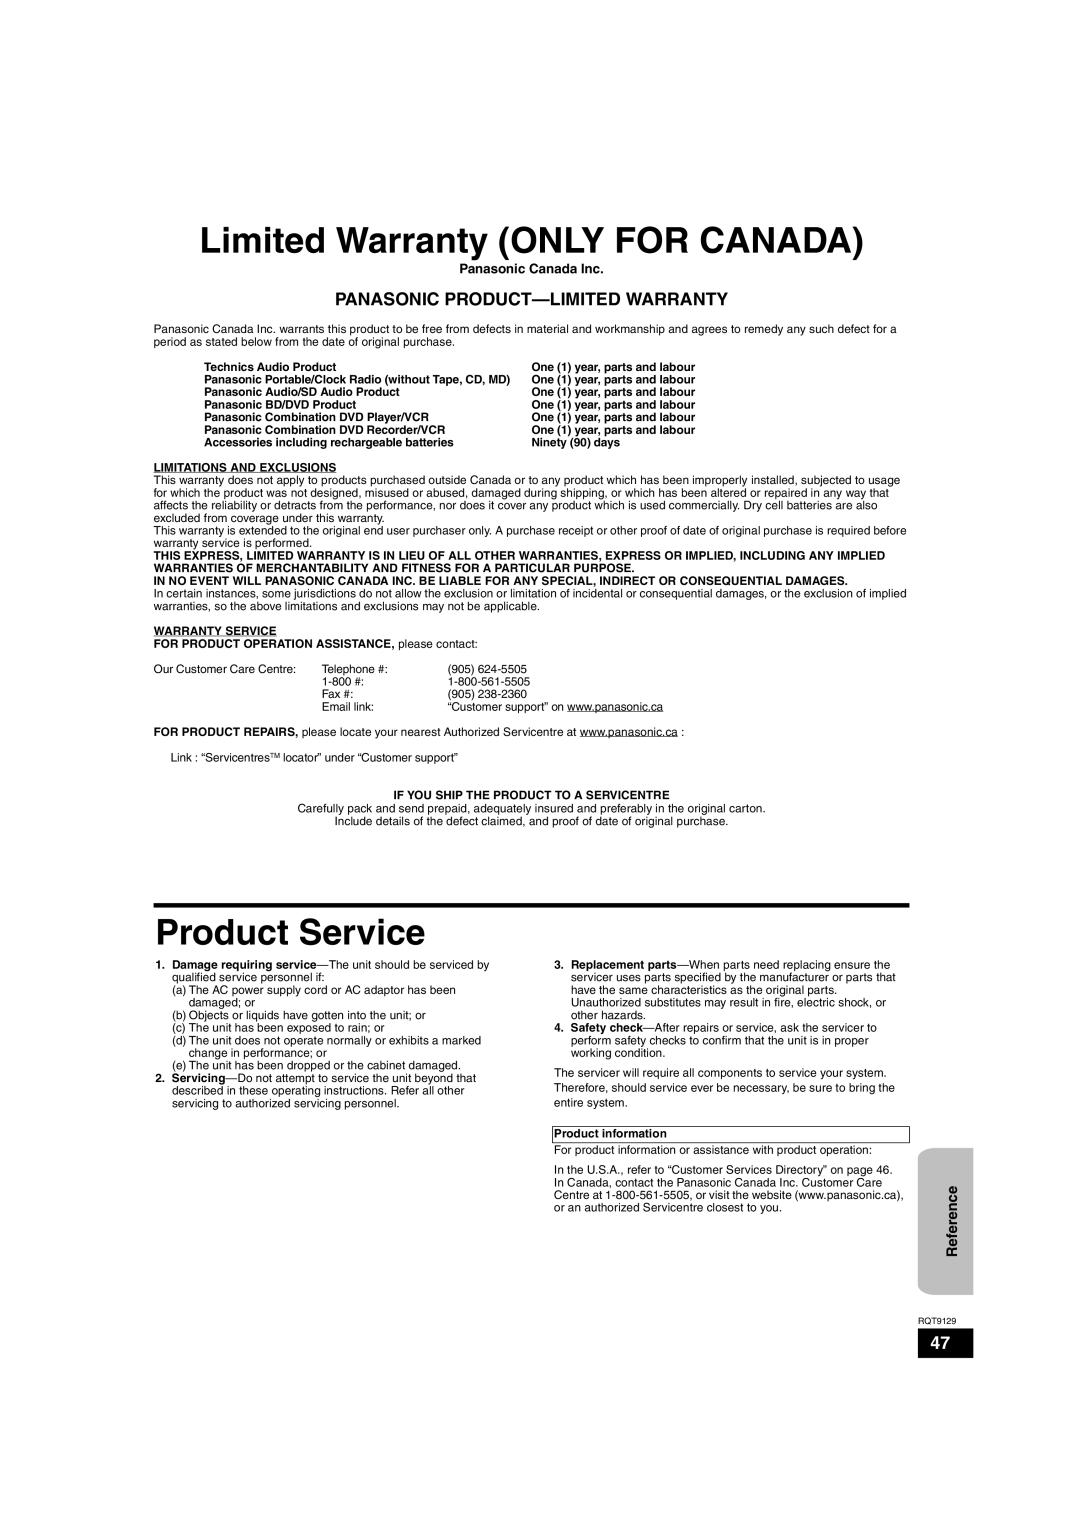 Panasonic SC-BT100 Limited Warranty ONLY FOR CANADA, Product Service, Panasonic Product-Limitedwarranty, Reference 